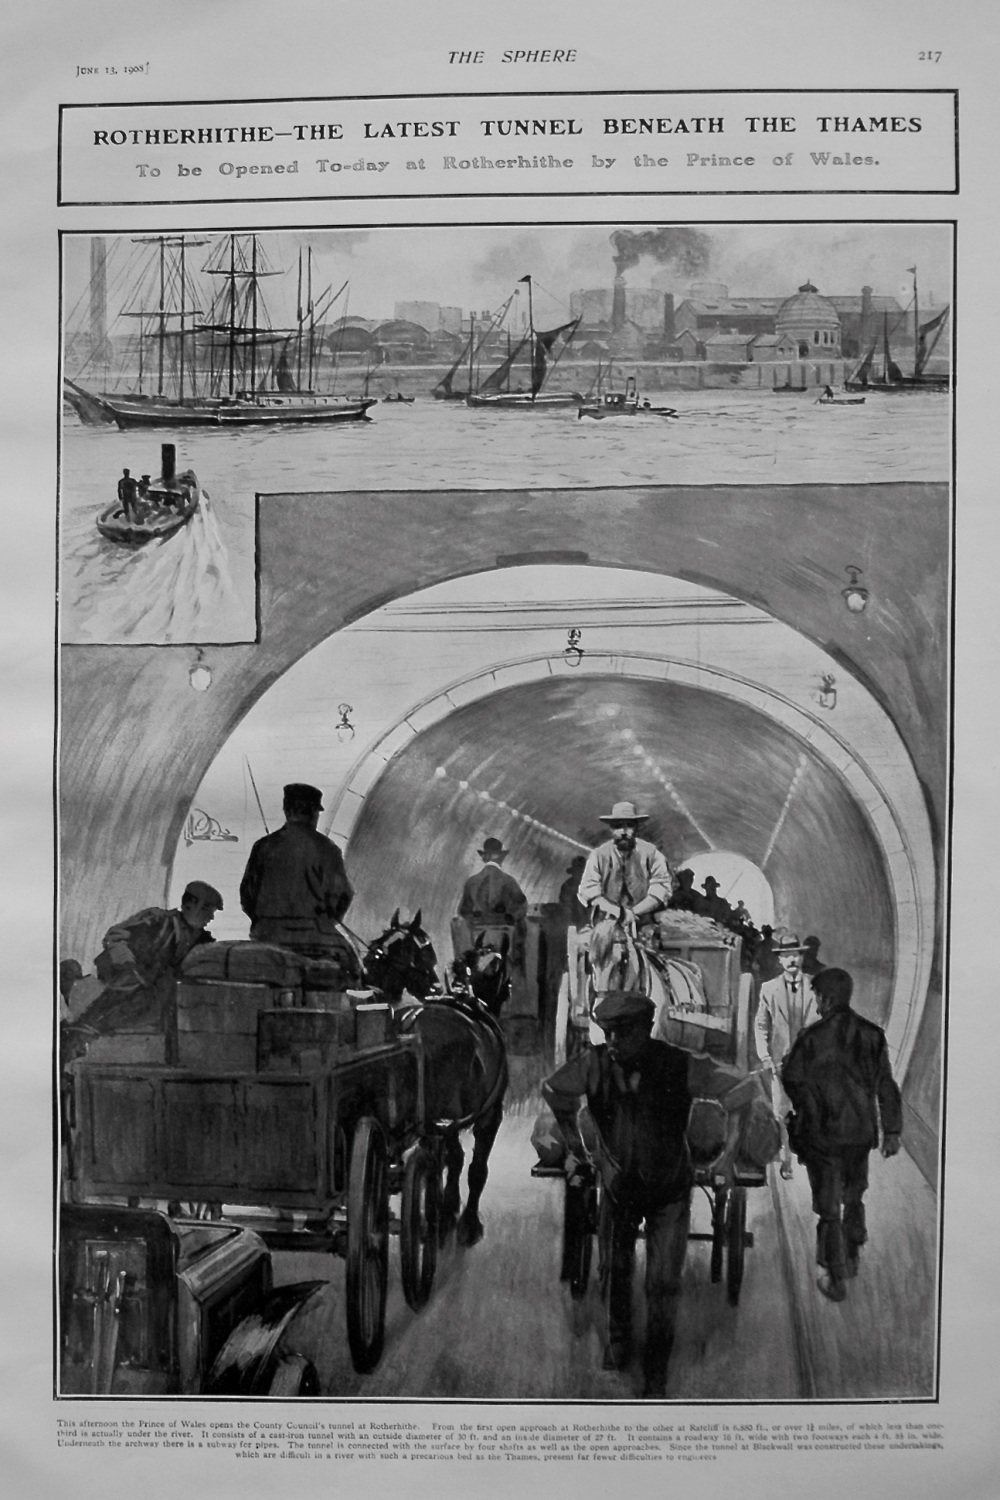 Rotherhithe - The Latest Tunnel Beneath the Thames. 1908